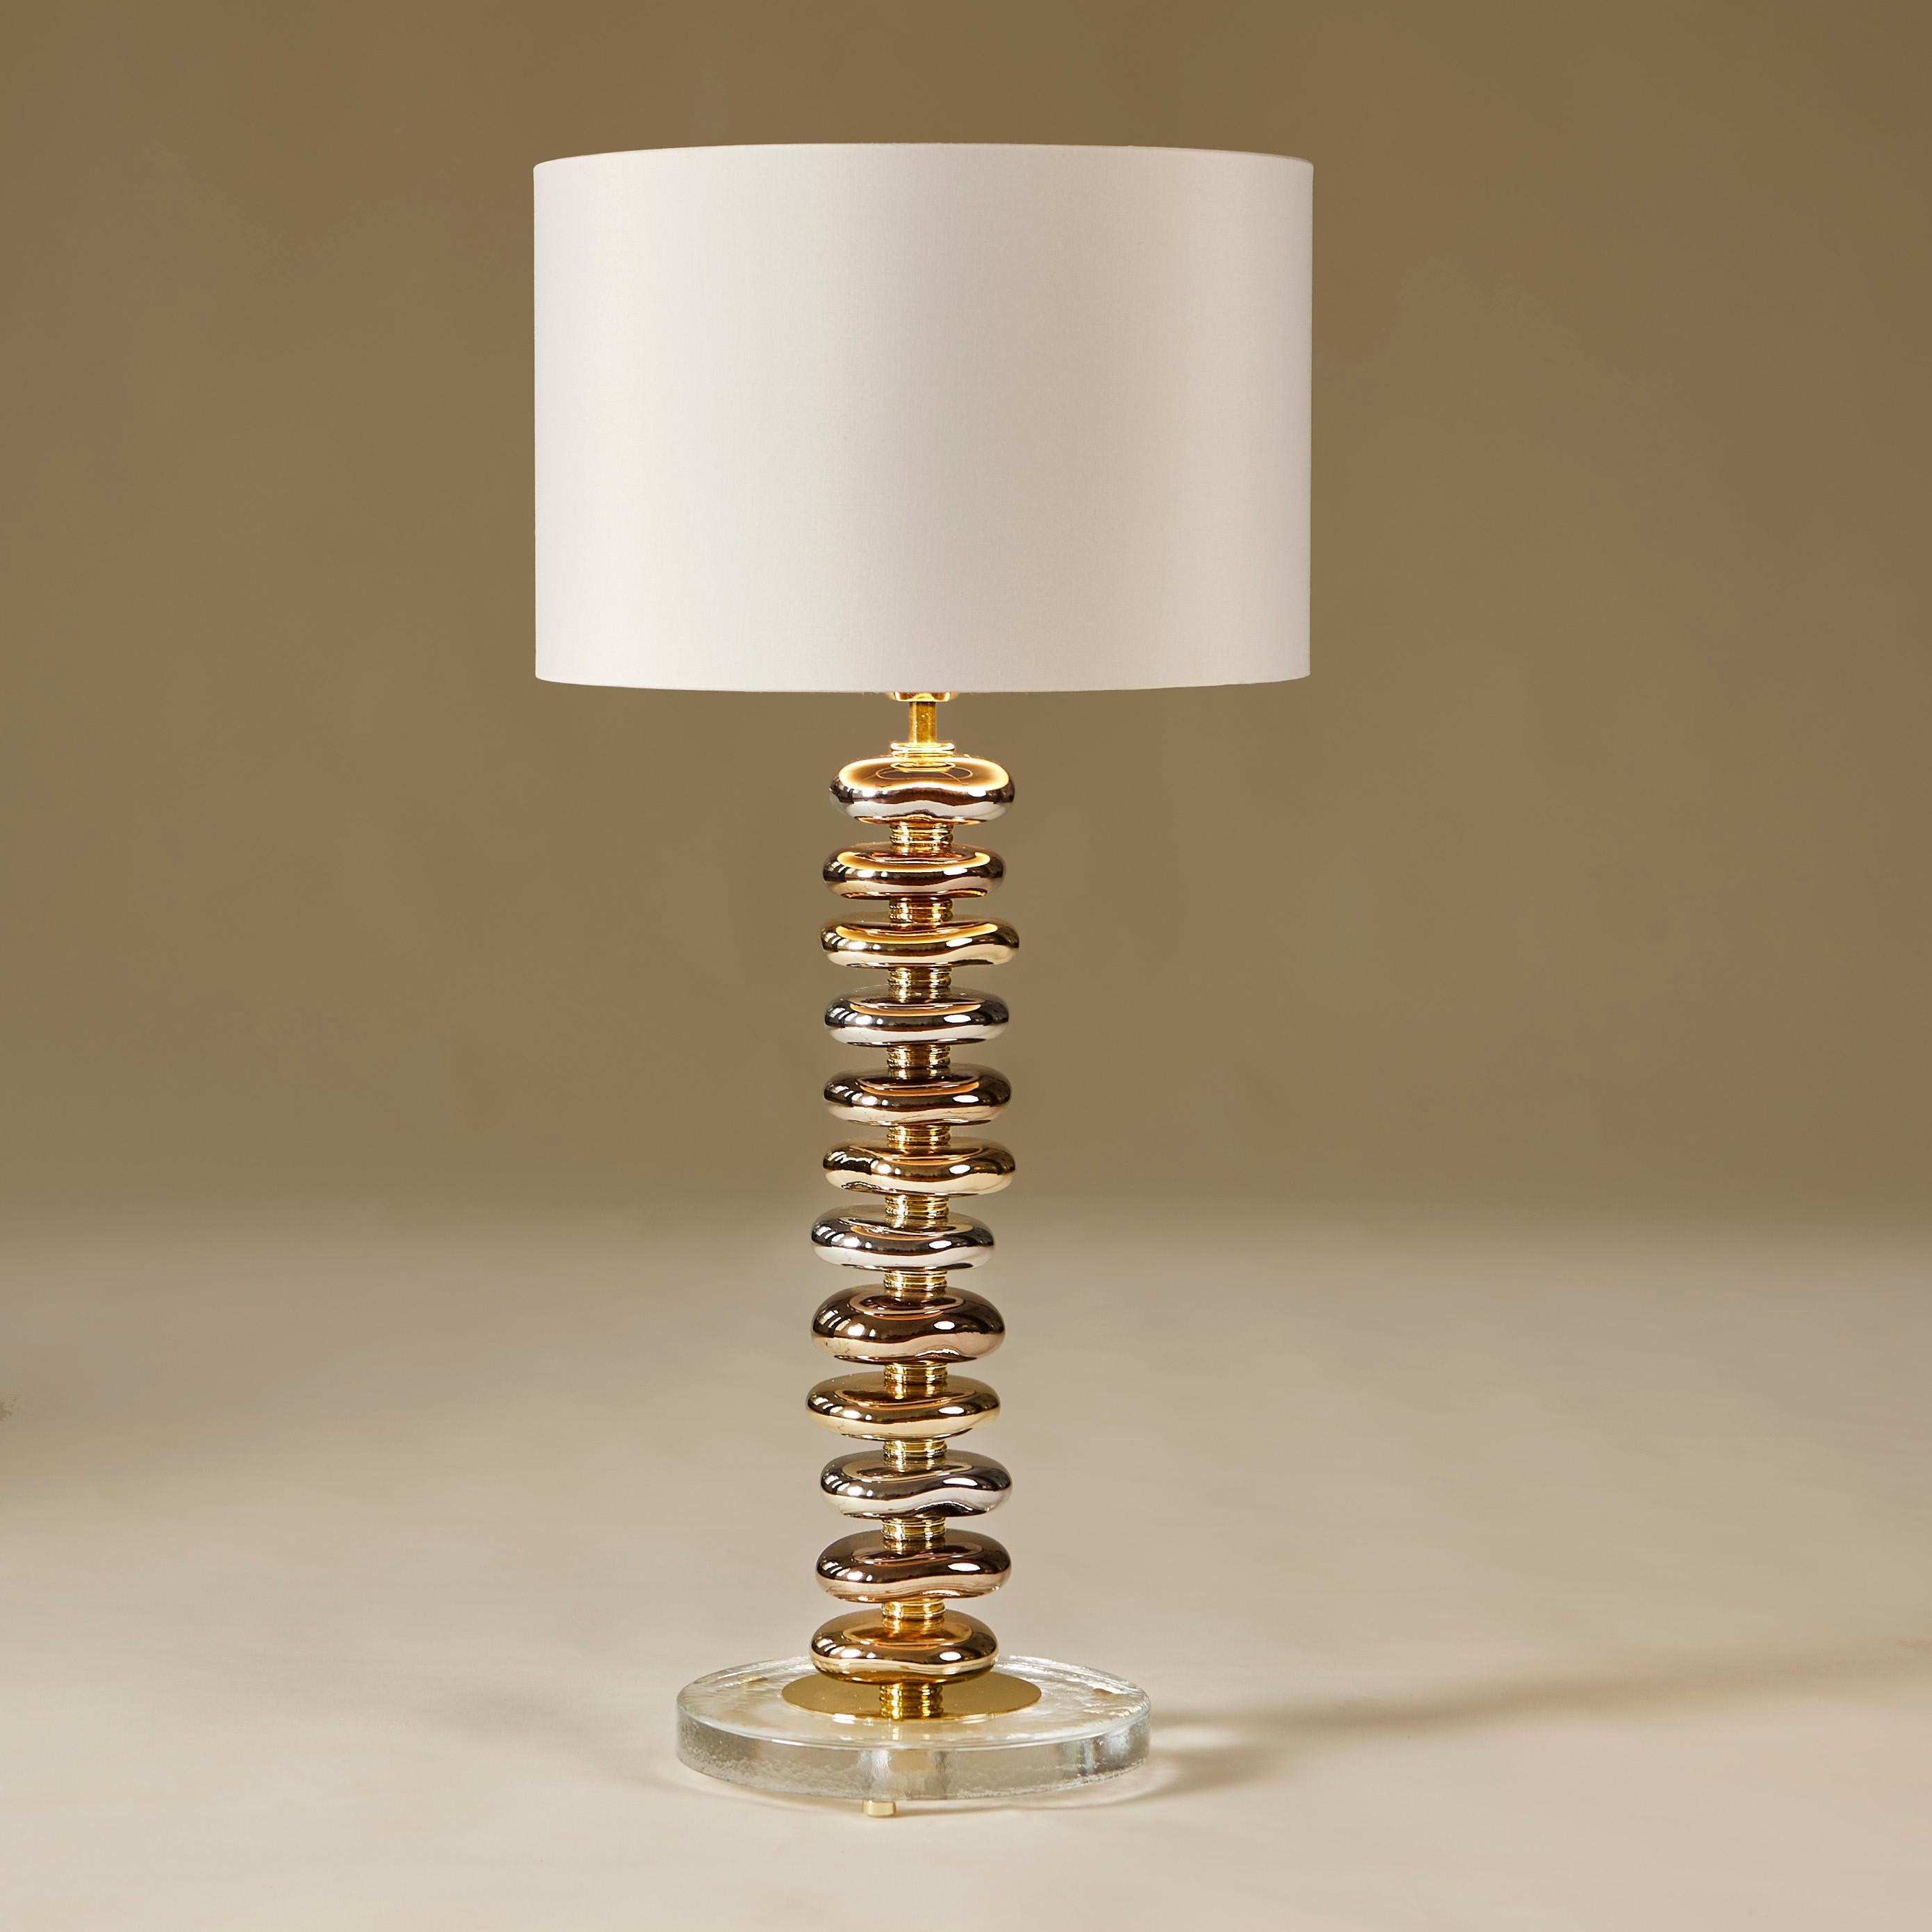 Limited edition pair of contemporary table lamp. Each lamps consists of 12 handmade smooth sculptured Murano pebbles in metallic shades of gold, silver and bronze. Each pebble is interspersed with a tiered layer of brass. Sits on circular glass base